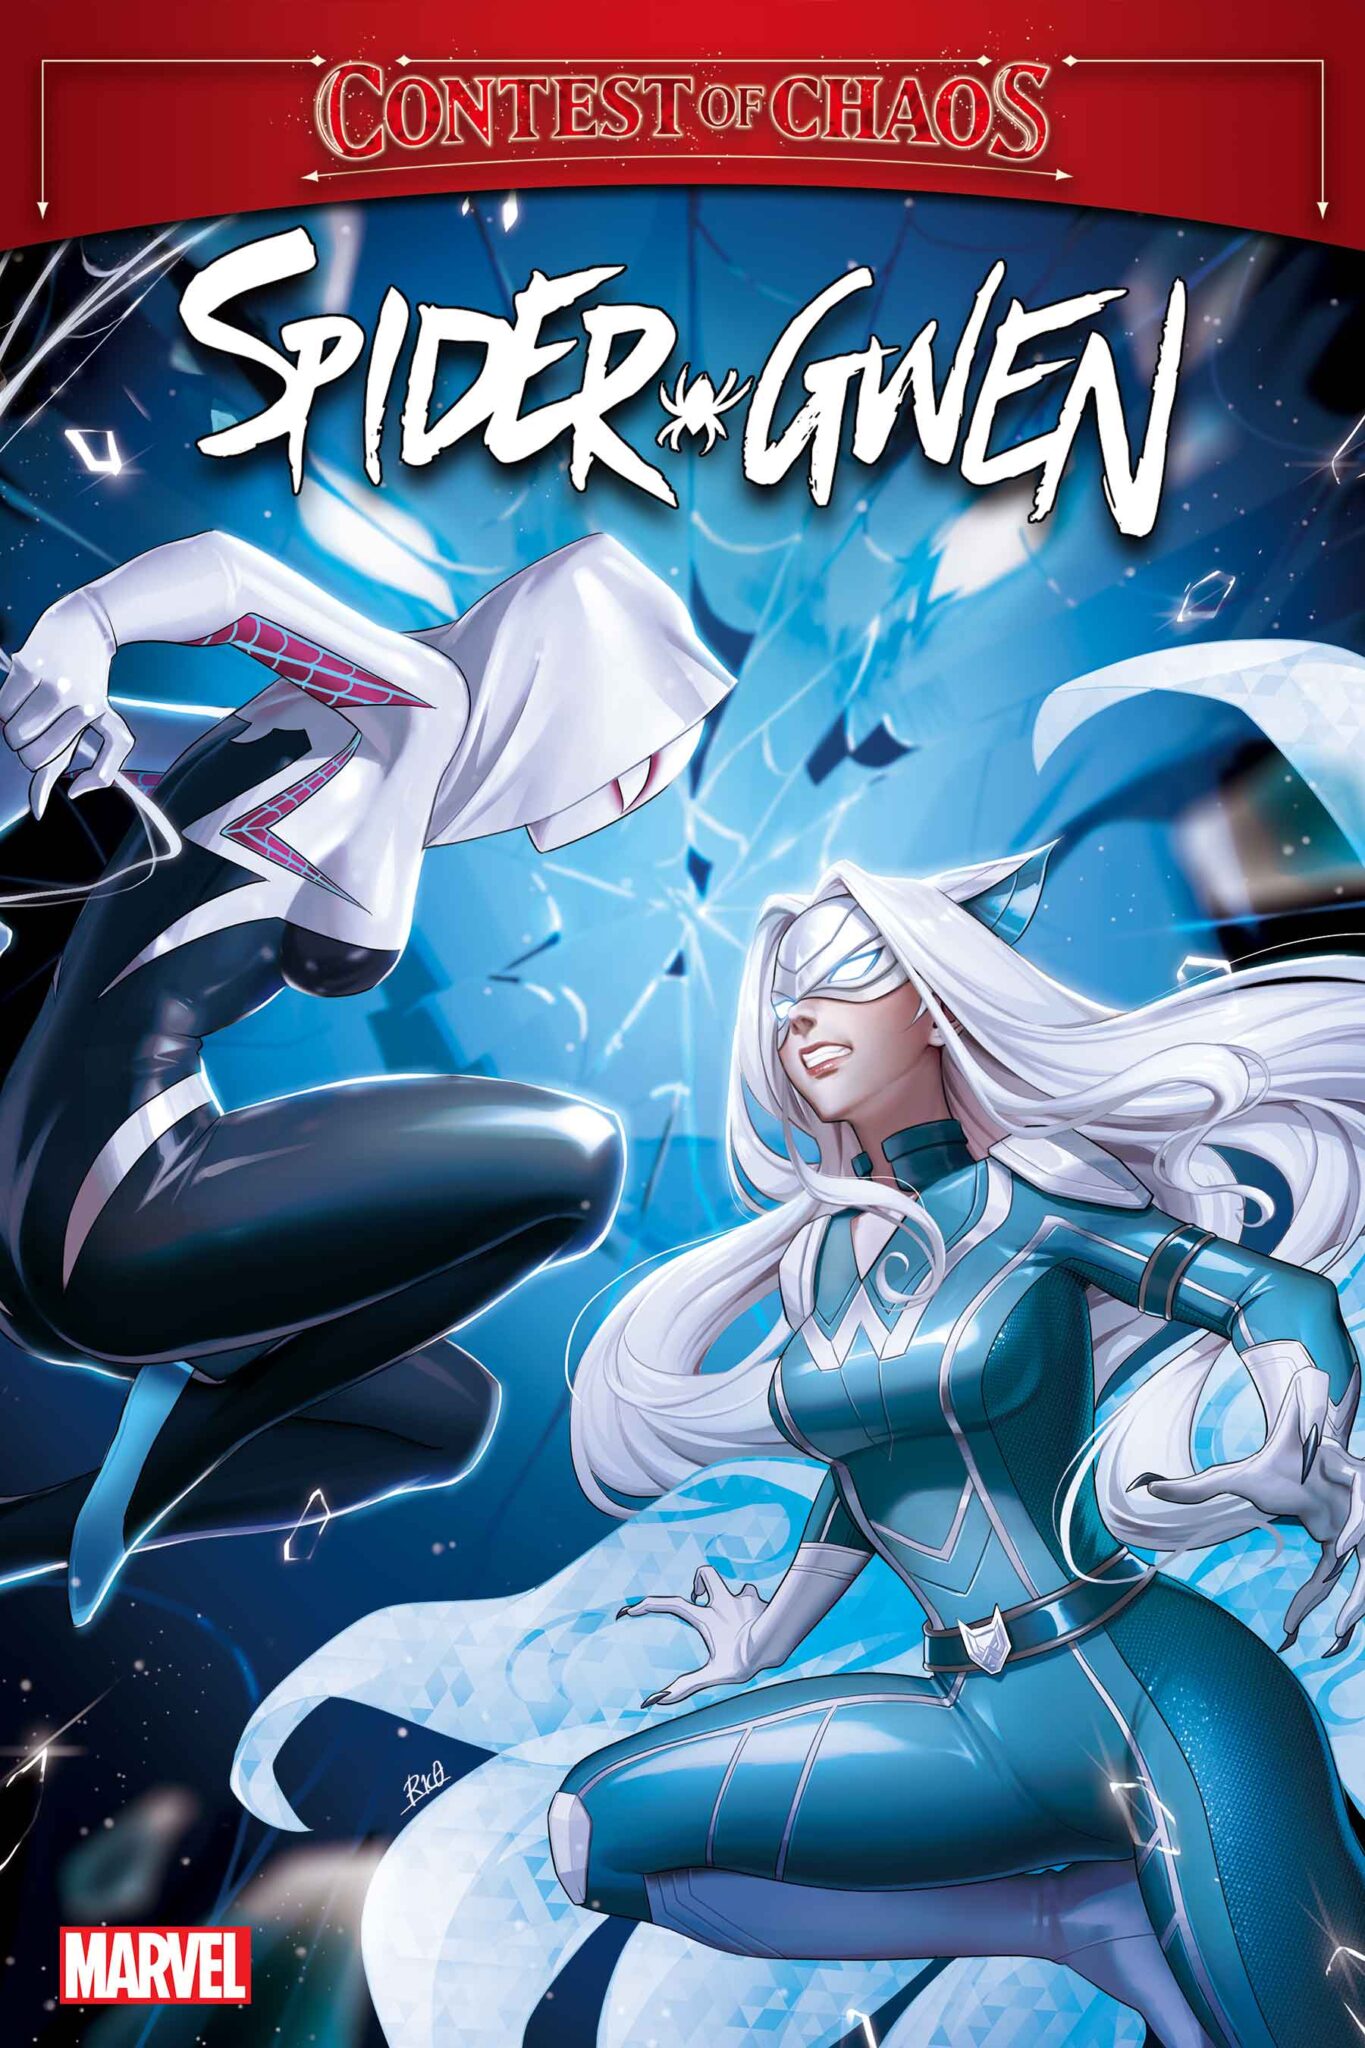 Spider Gwen Annual Contest of Chaos